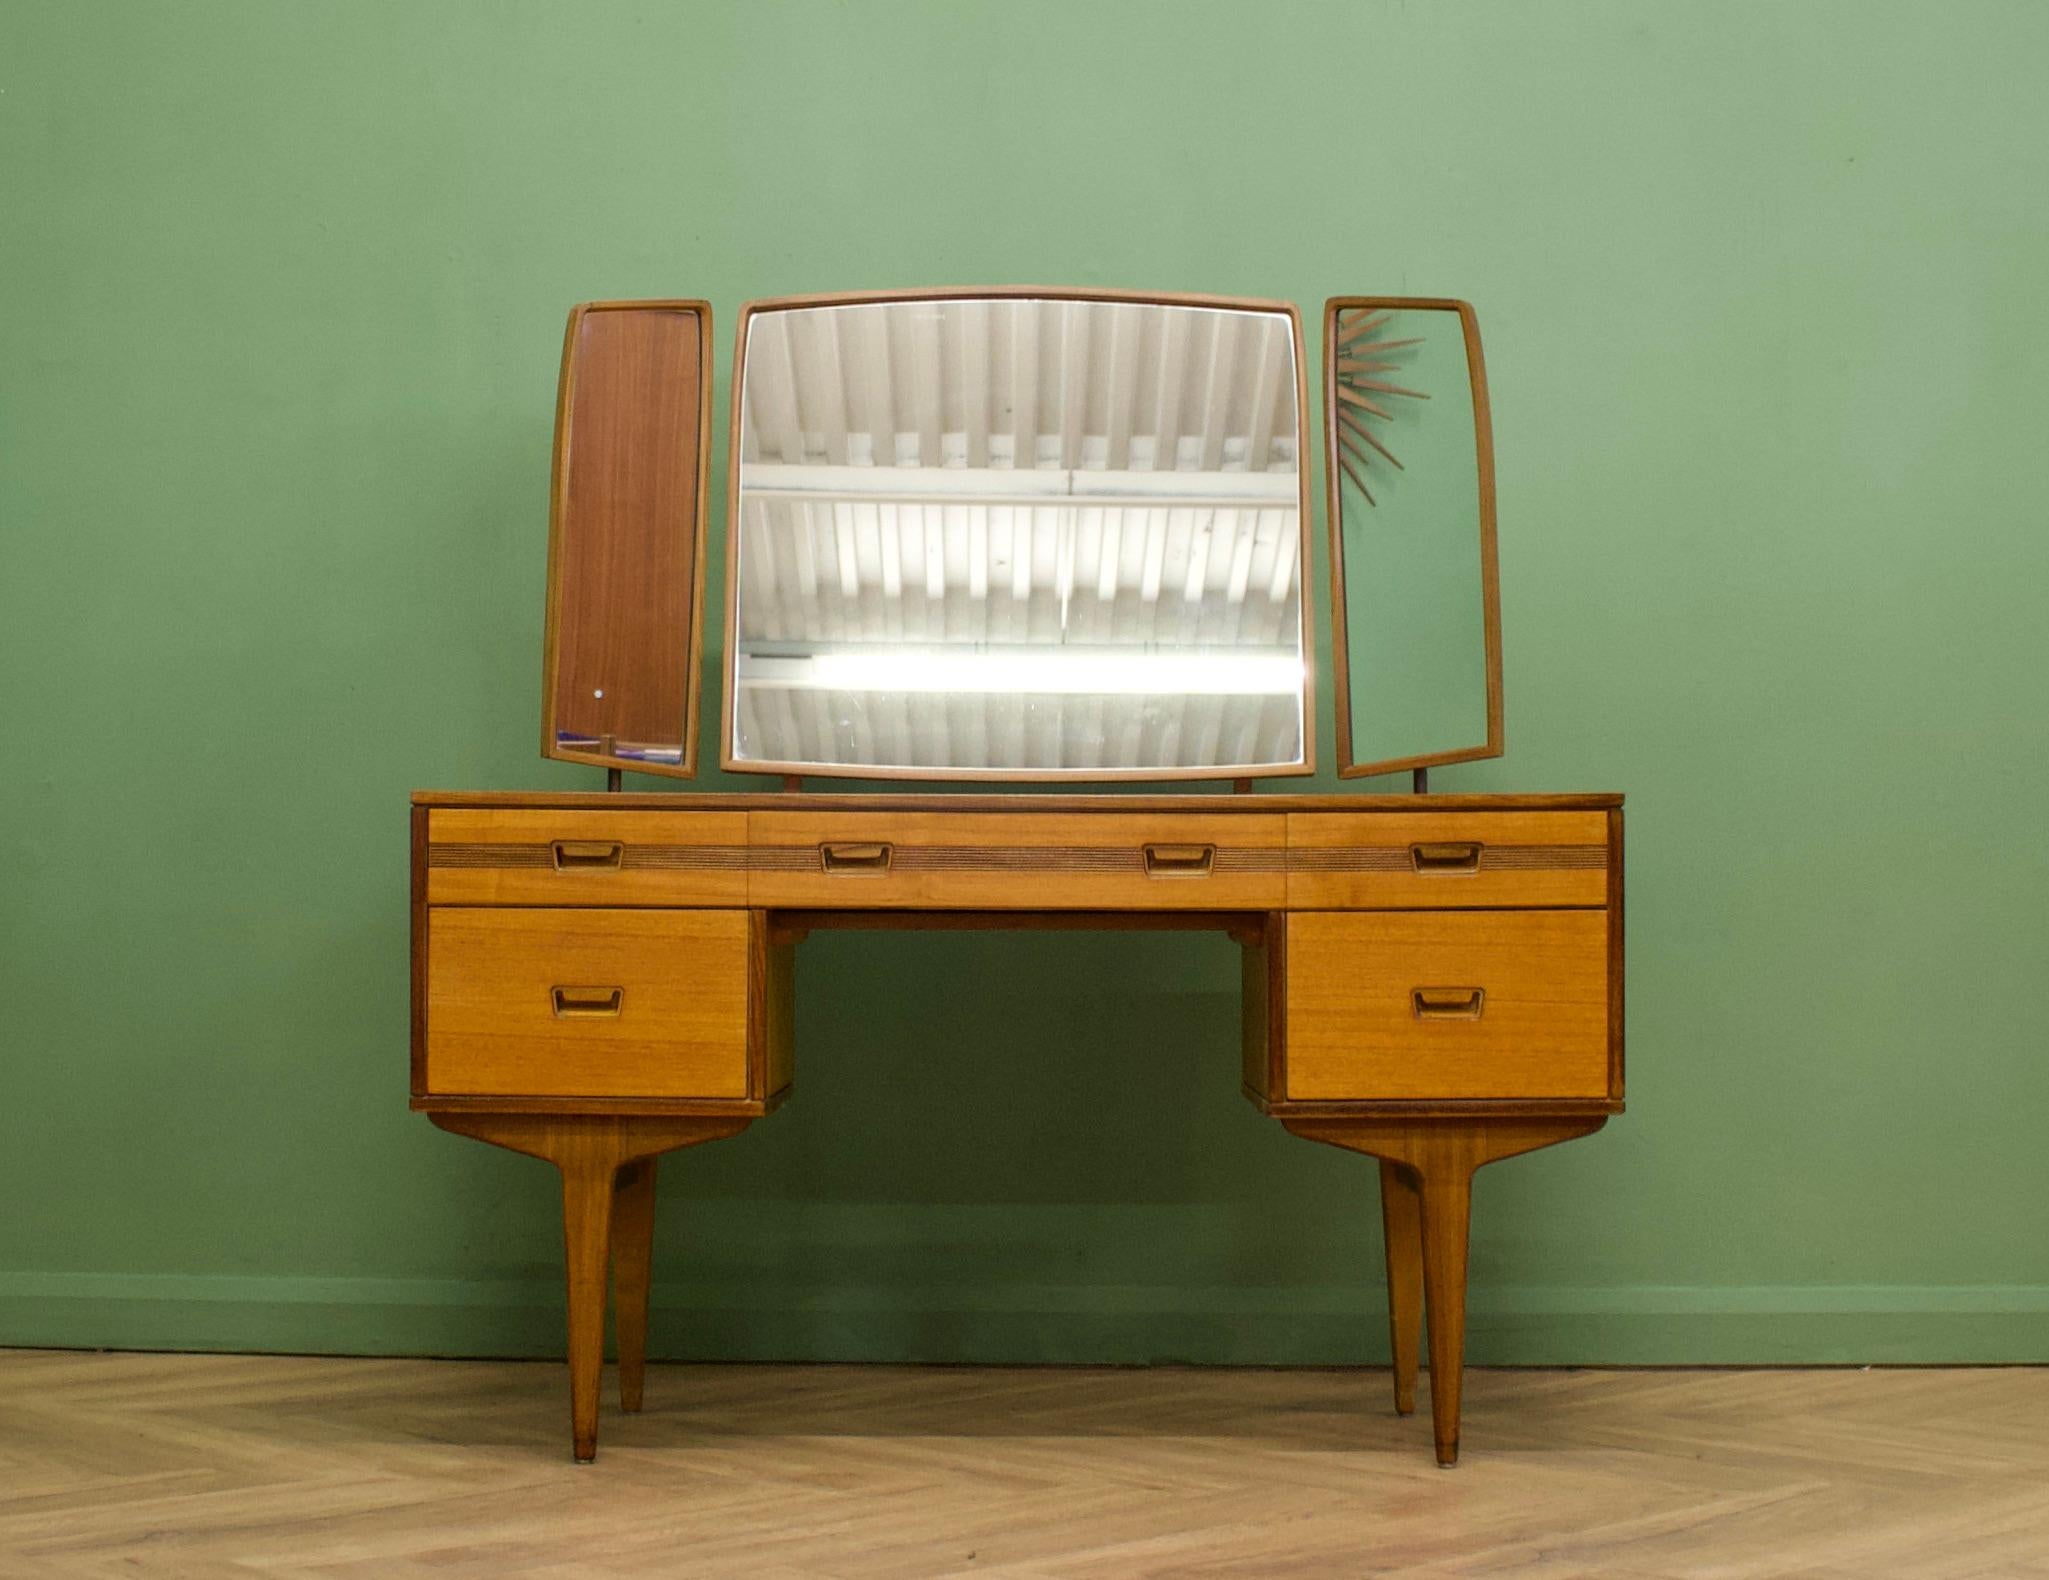 A mid century teak dressing table from Butilux - a little known about high quality furniture makers, circa 1960's
Complete with a triptych mirror - all three are adjustable either by tilting or swiveling - the two side mirrors are held by brass